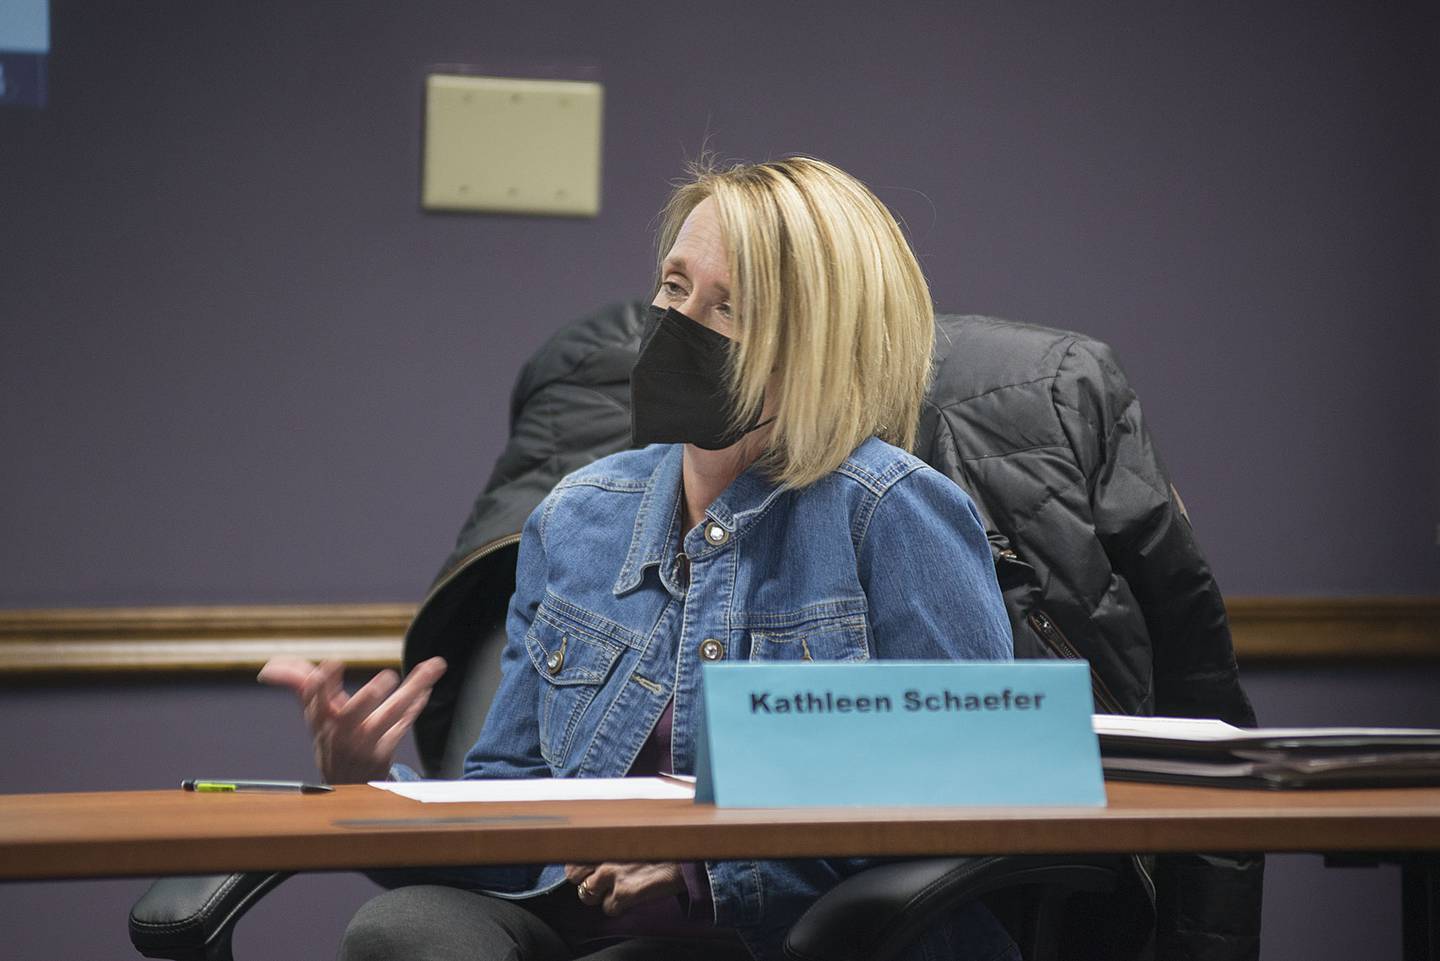 Kathleen Schaefer, member of the Community Engagement Committee for the Dixon School Board, speaks Tuesday, Feb. 15, 2022 during a meeting concerning results of a recent survey.